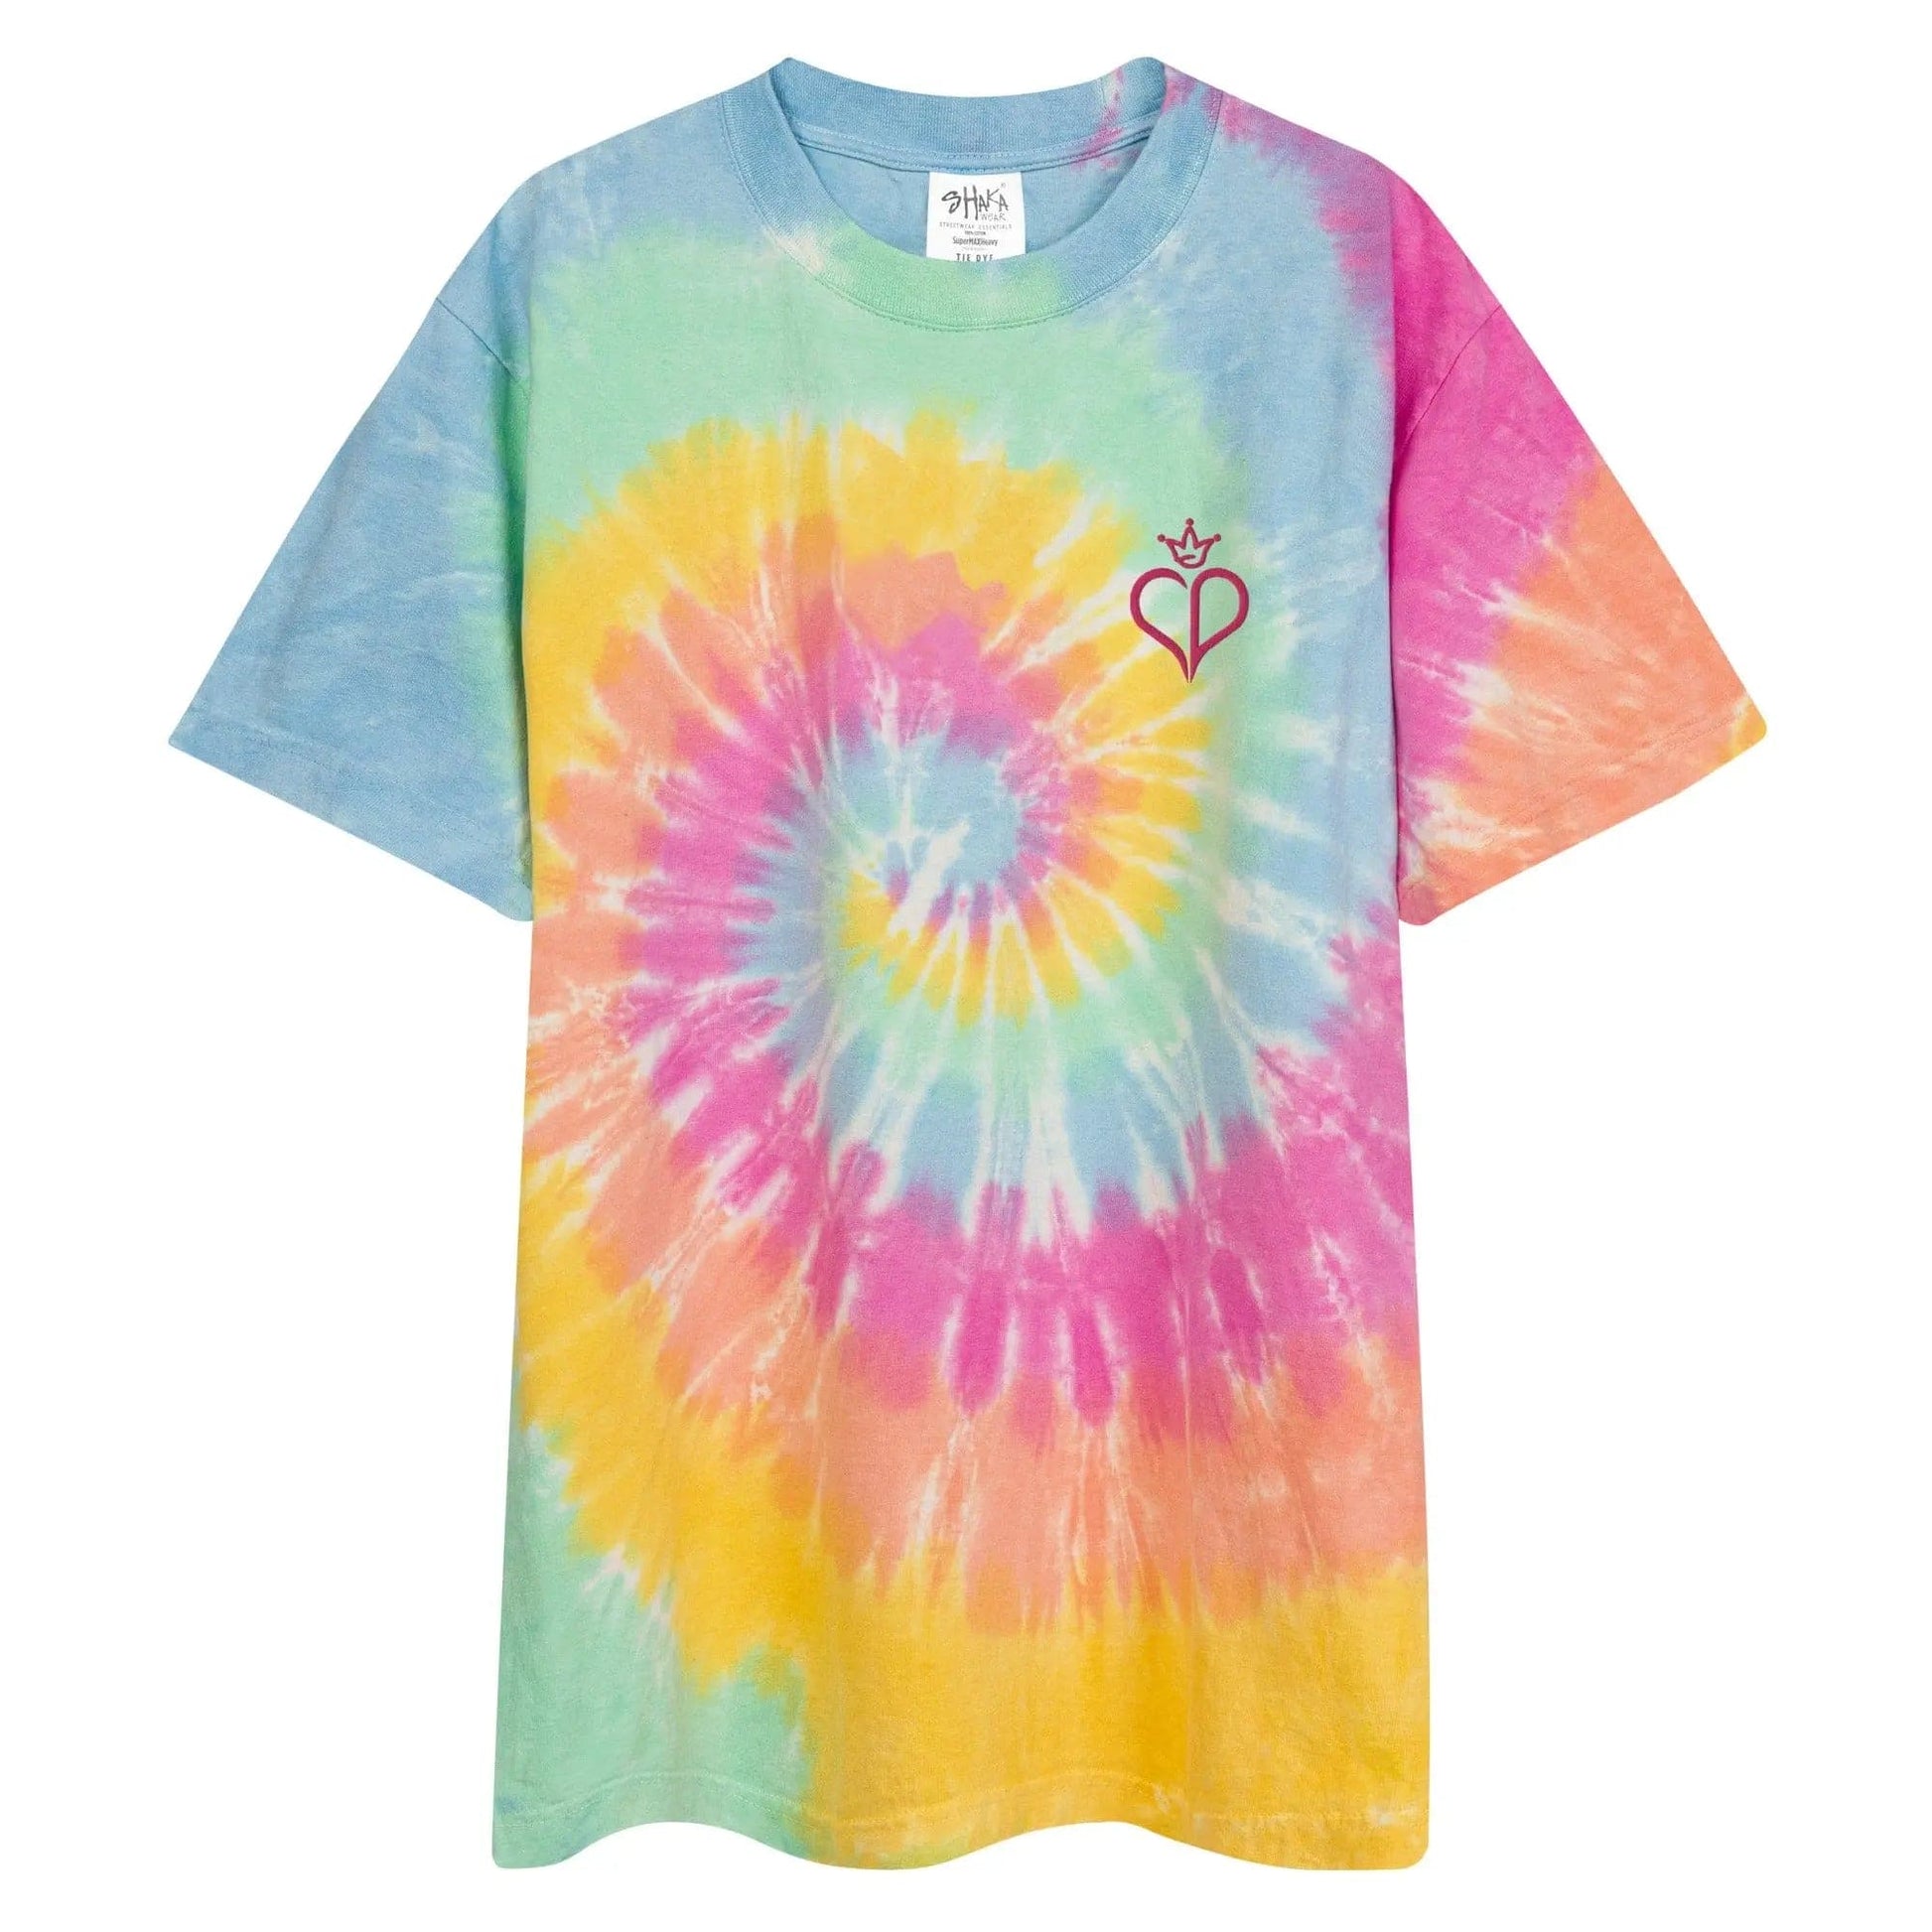 Sherbet Rainbow Oversized tie-dye t-shirt Charms By Prince